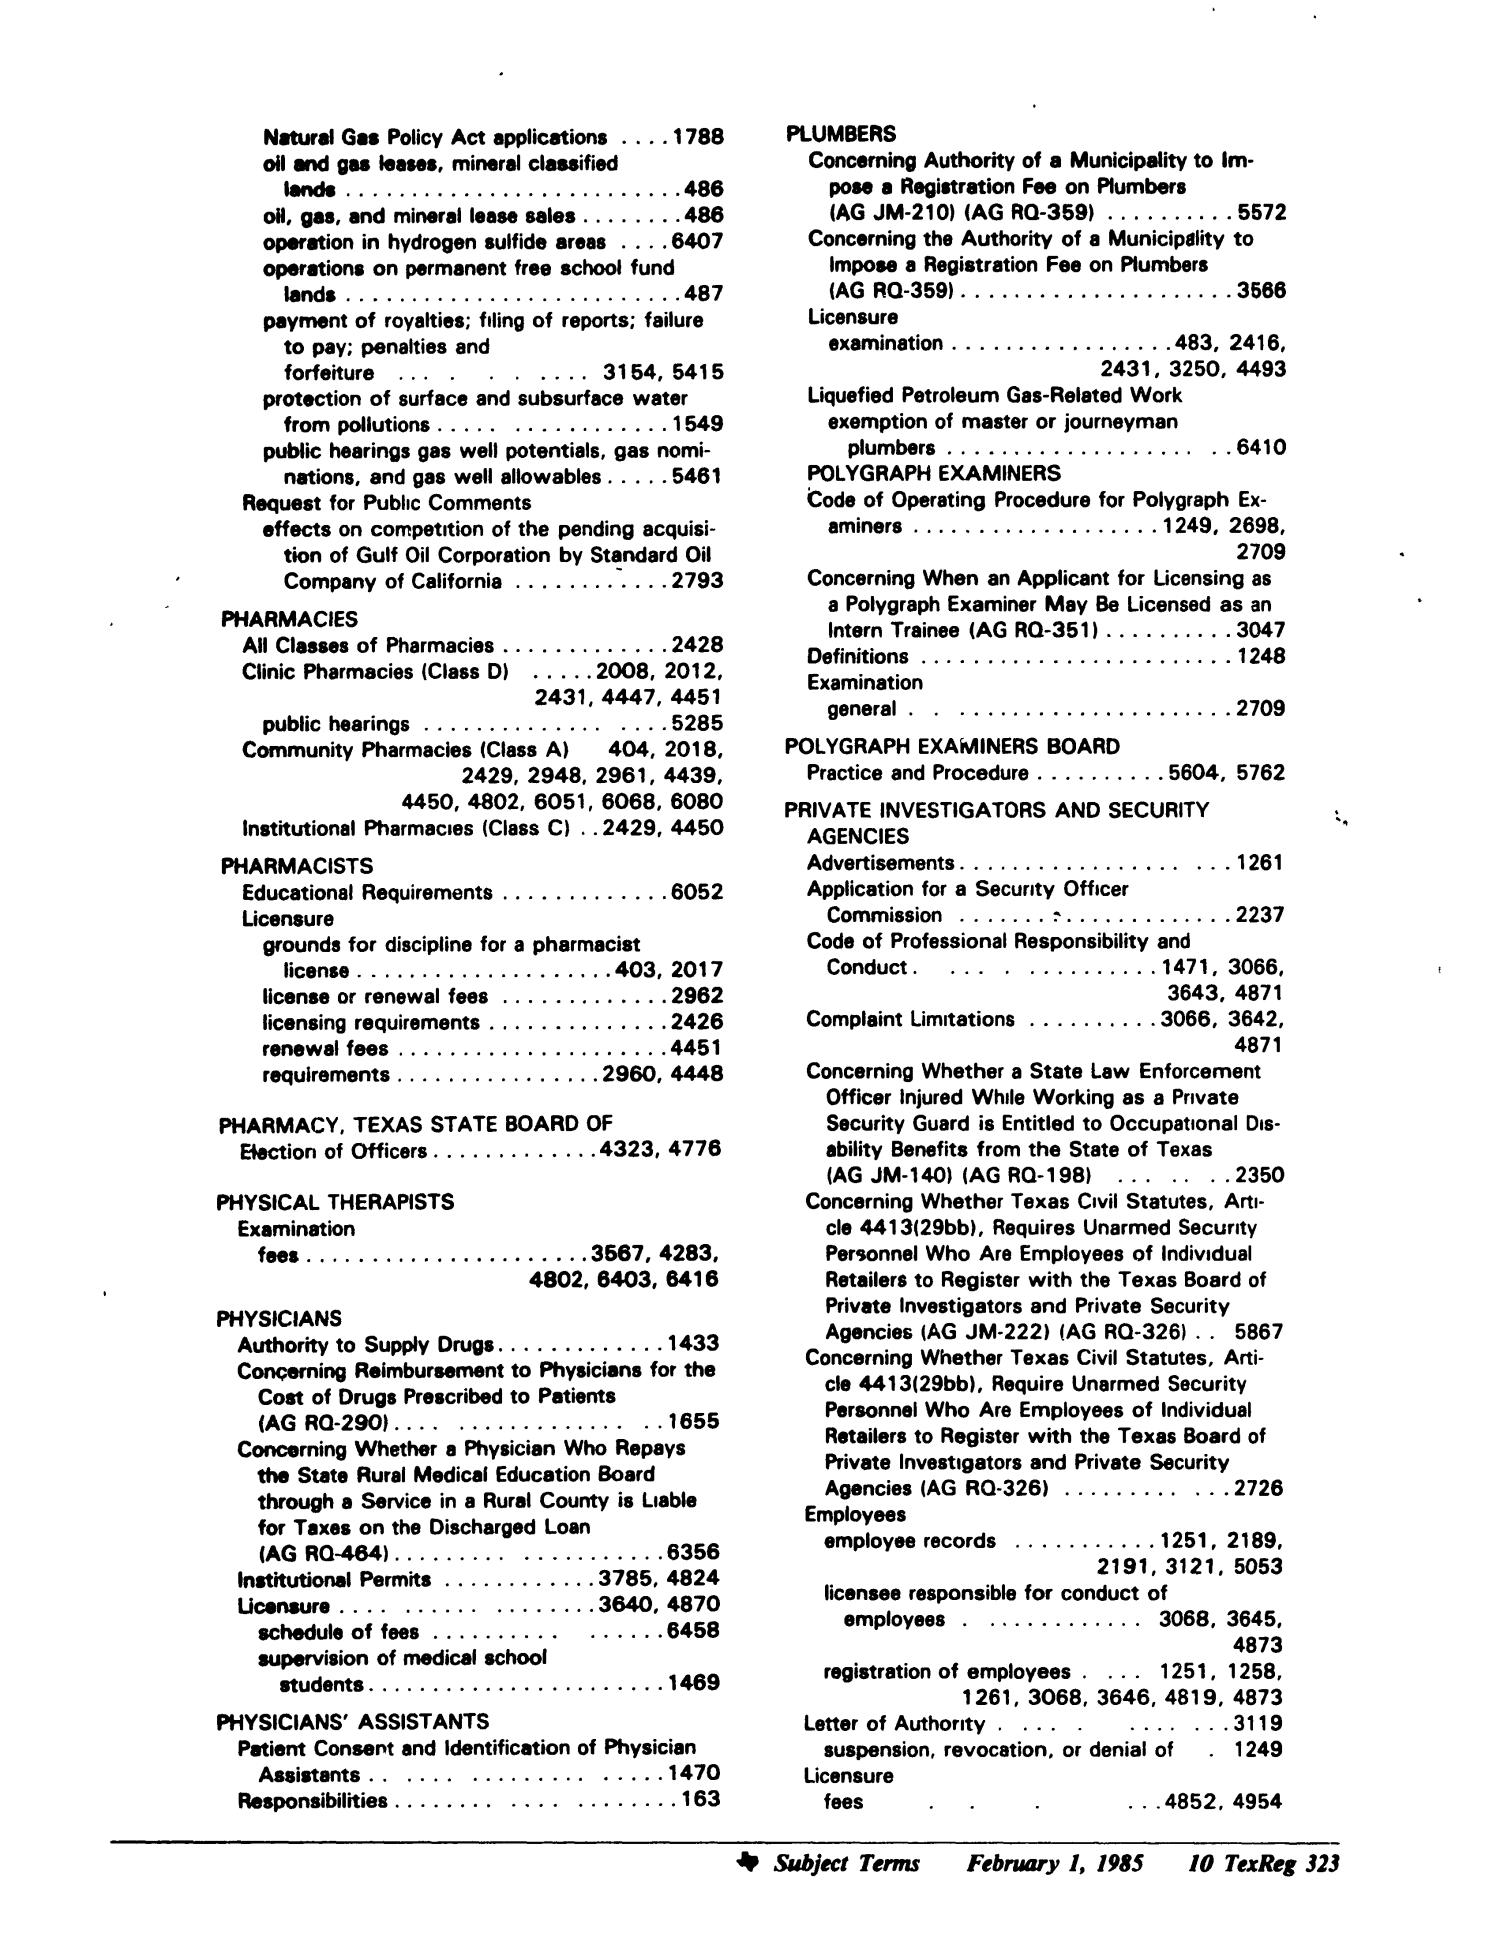 Texas Register: Annual Index January 1984 - December 1984, Volume 9 [Part Two], Pages 284-384, February 1, 1985
                                                
                                                    323
                                                